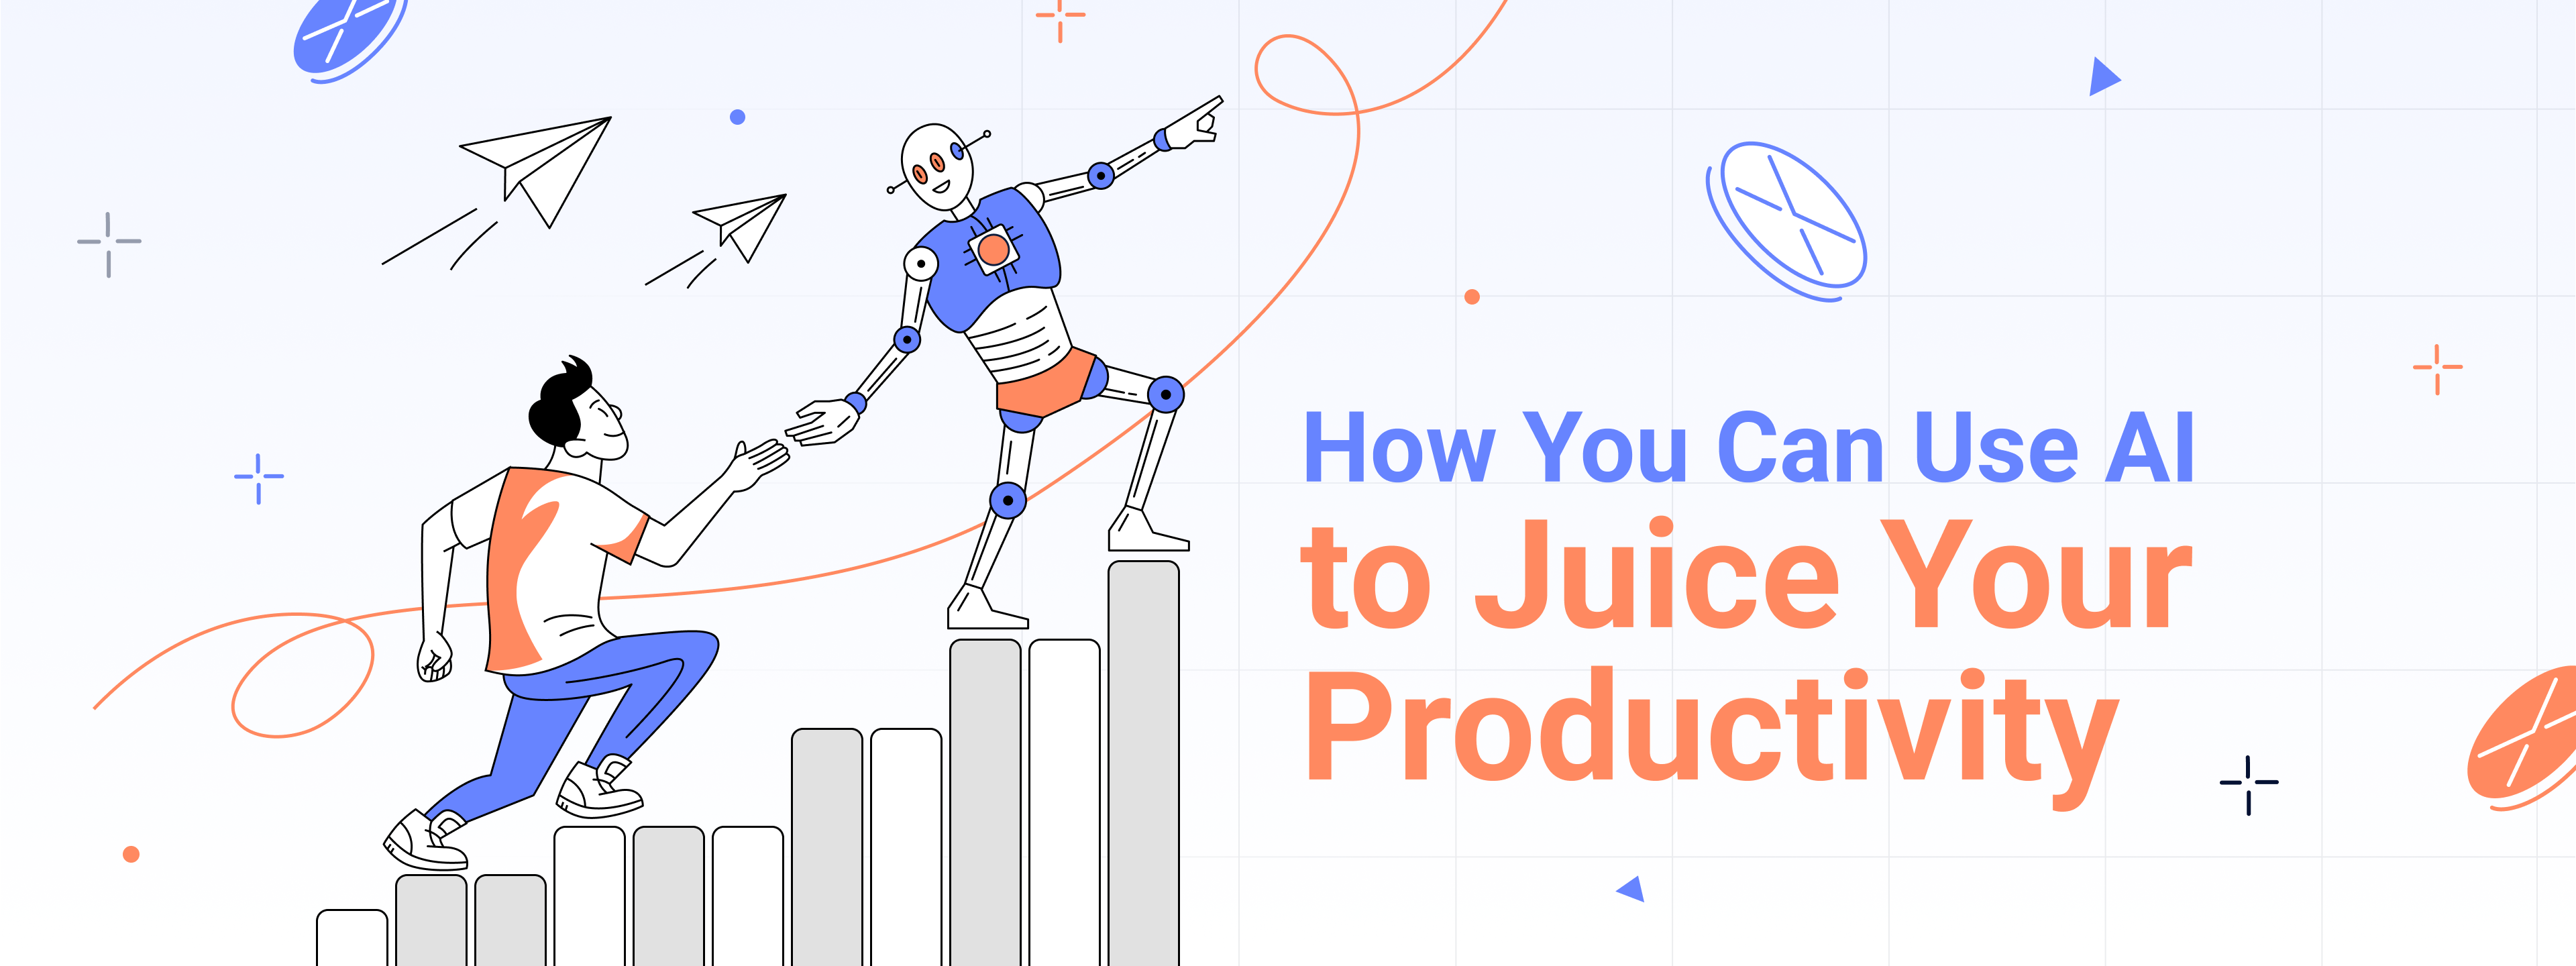 ​How You Can Use AI To Juice Your Productivity